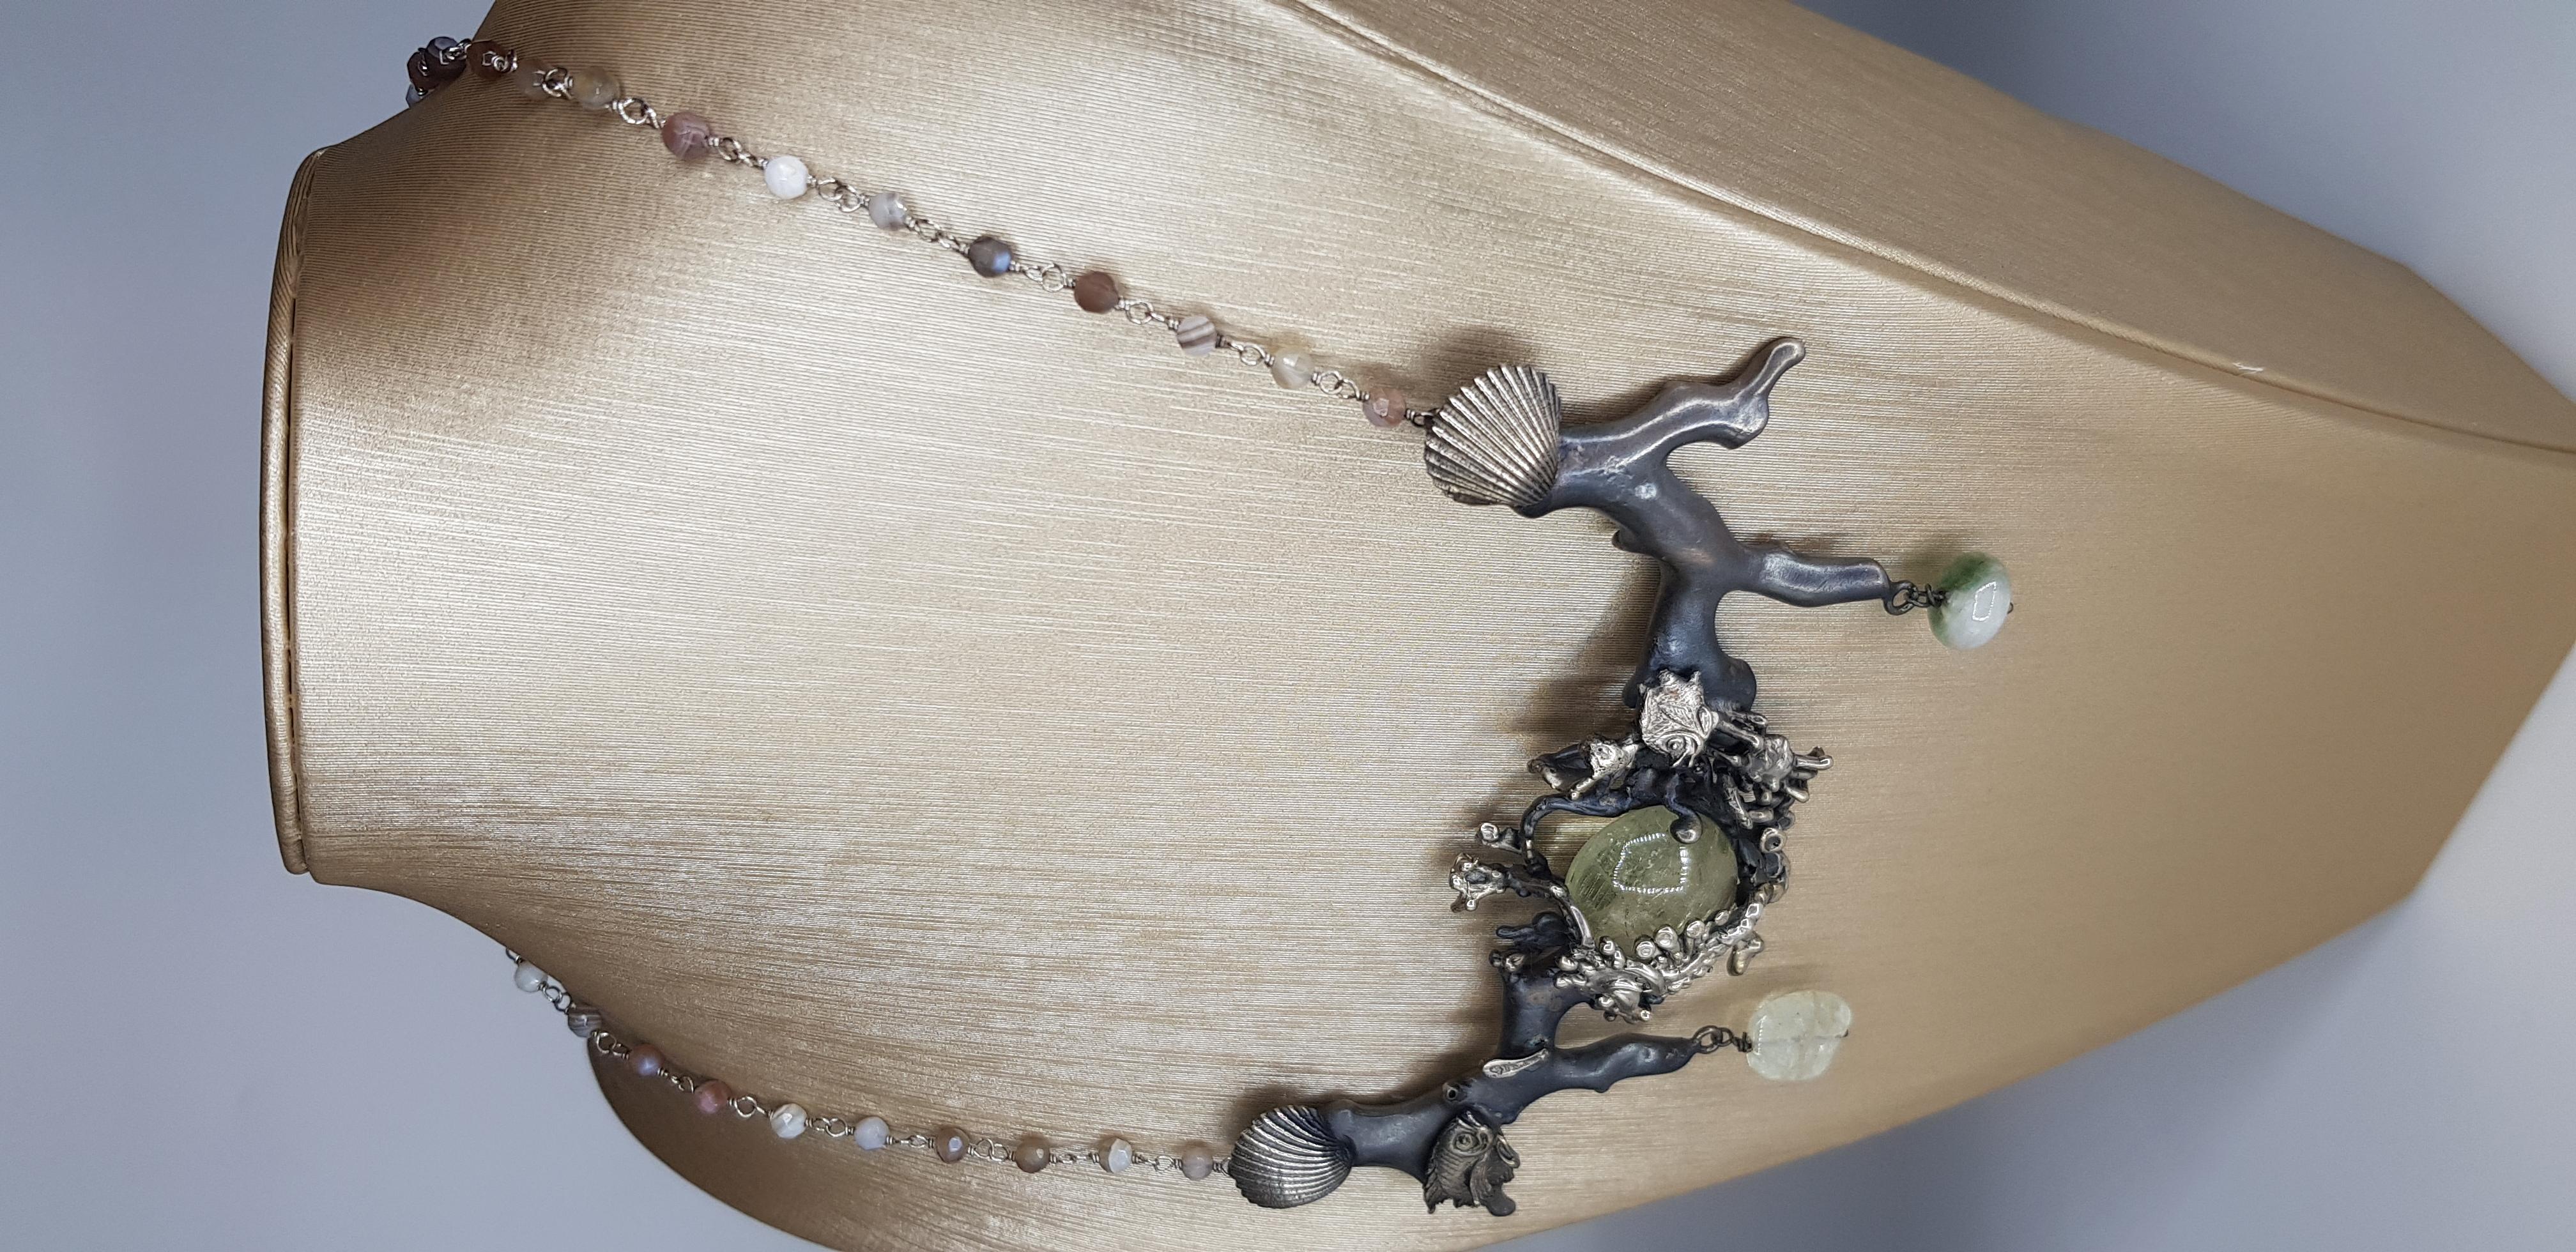 d'Avossa Silver Necklace with marine life theme such as corals, sea horse, crab, fish and shells all made in burnished silver with a central Green Aquamarine cabochon and Agatha chain